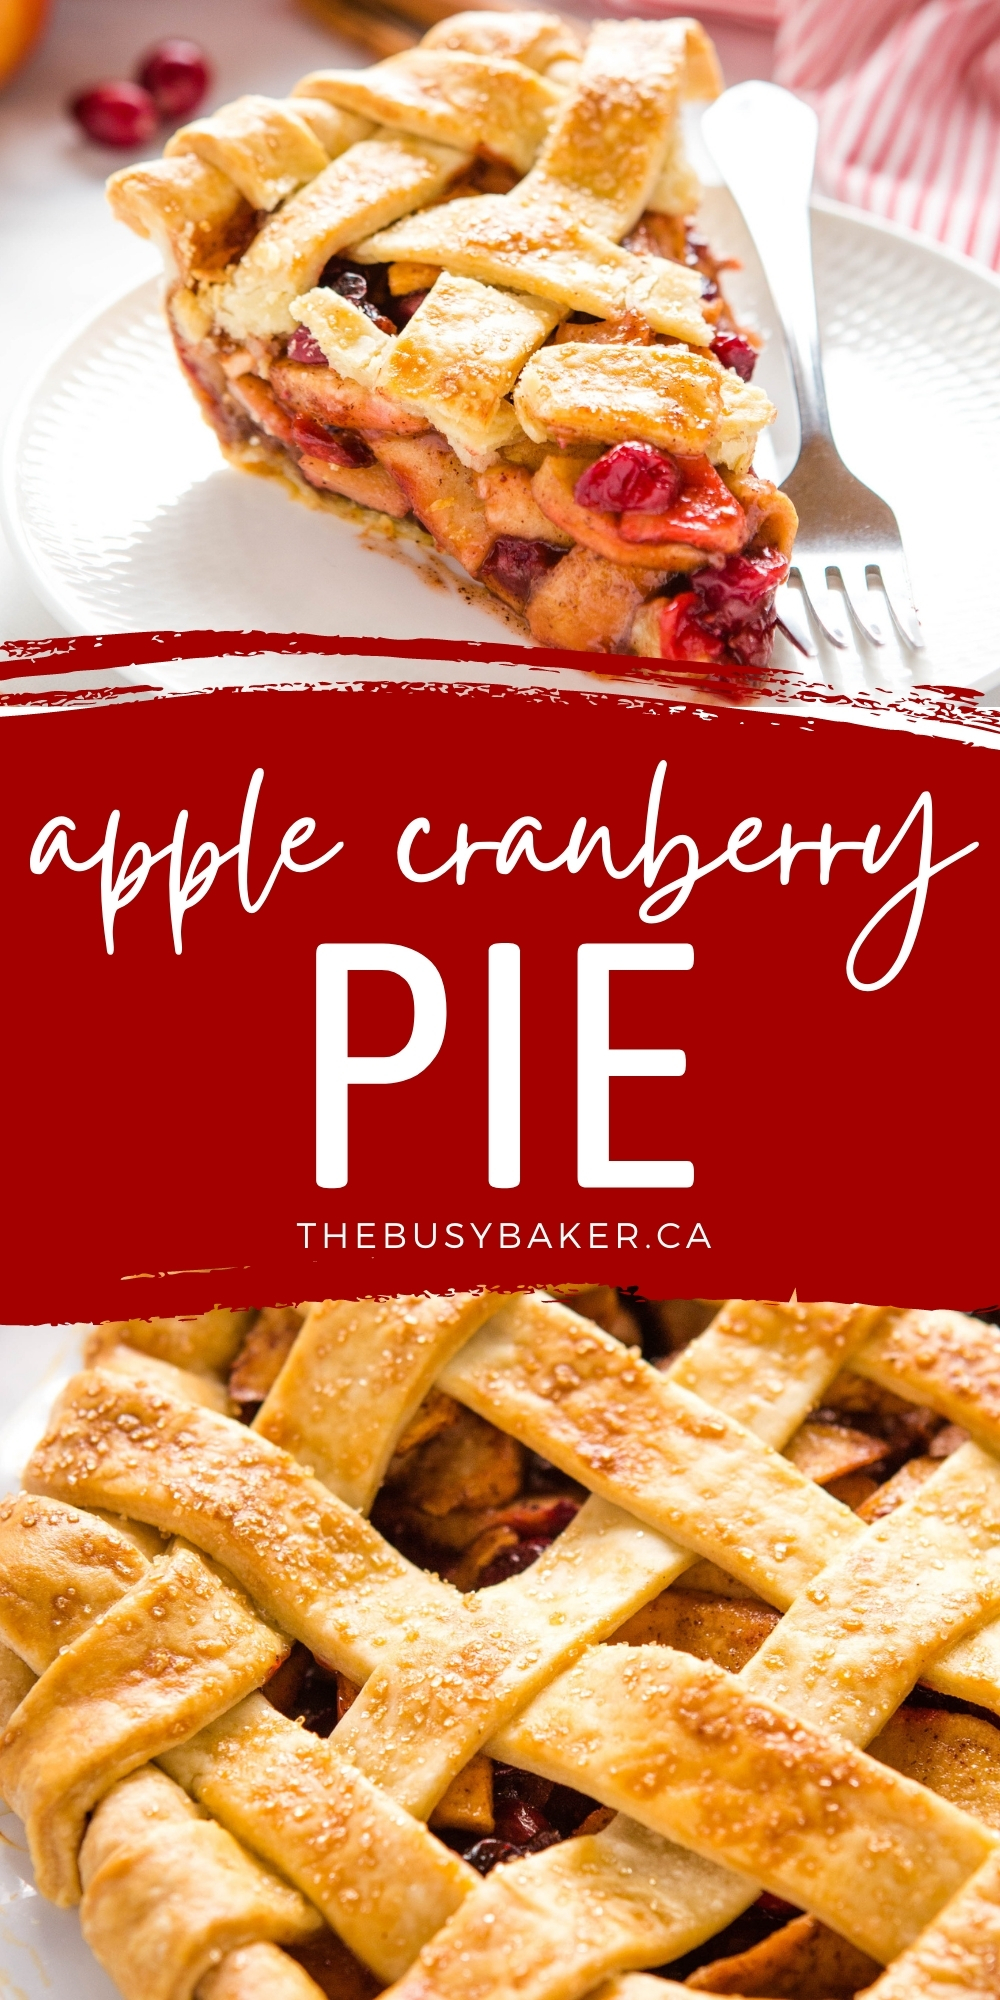 This Apple Cranberry Pie Recipe makes the perfect holiday dessert. Get the recipe and our 10 no fail tips on how to make the perfect pie! Recipe from thebusybaker.ca! #applepie #cranberryapplepie #holidaypie #holidaydessert #christmas #thanksgiving via @busybakerblog